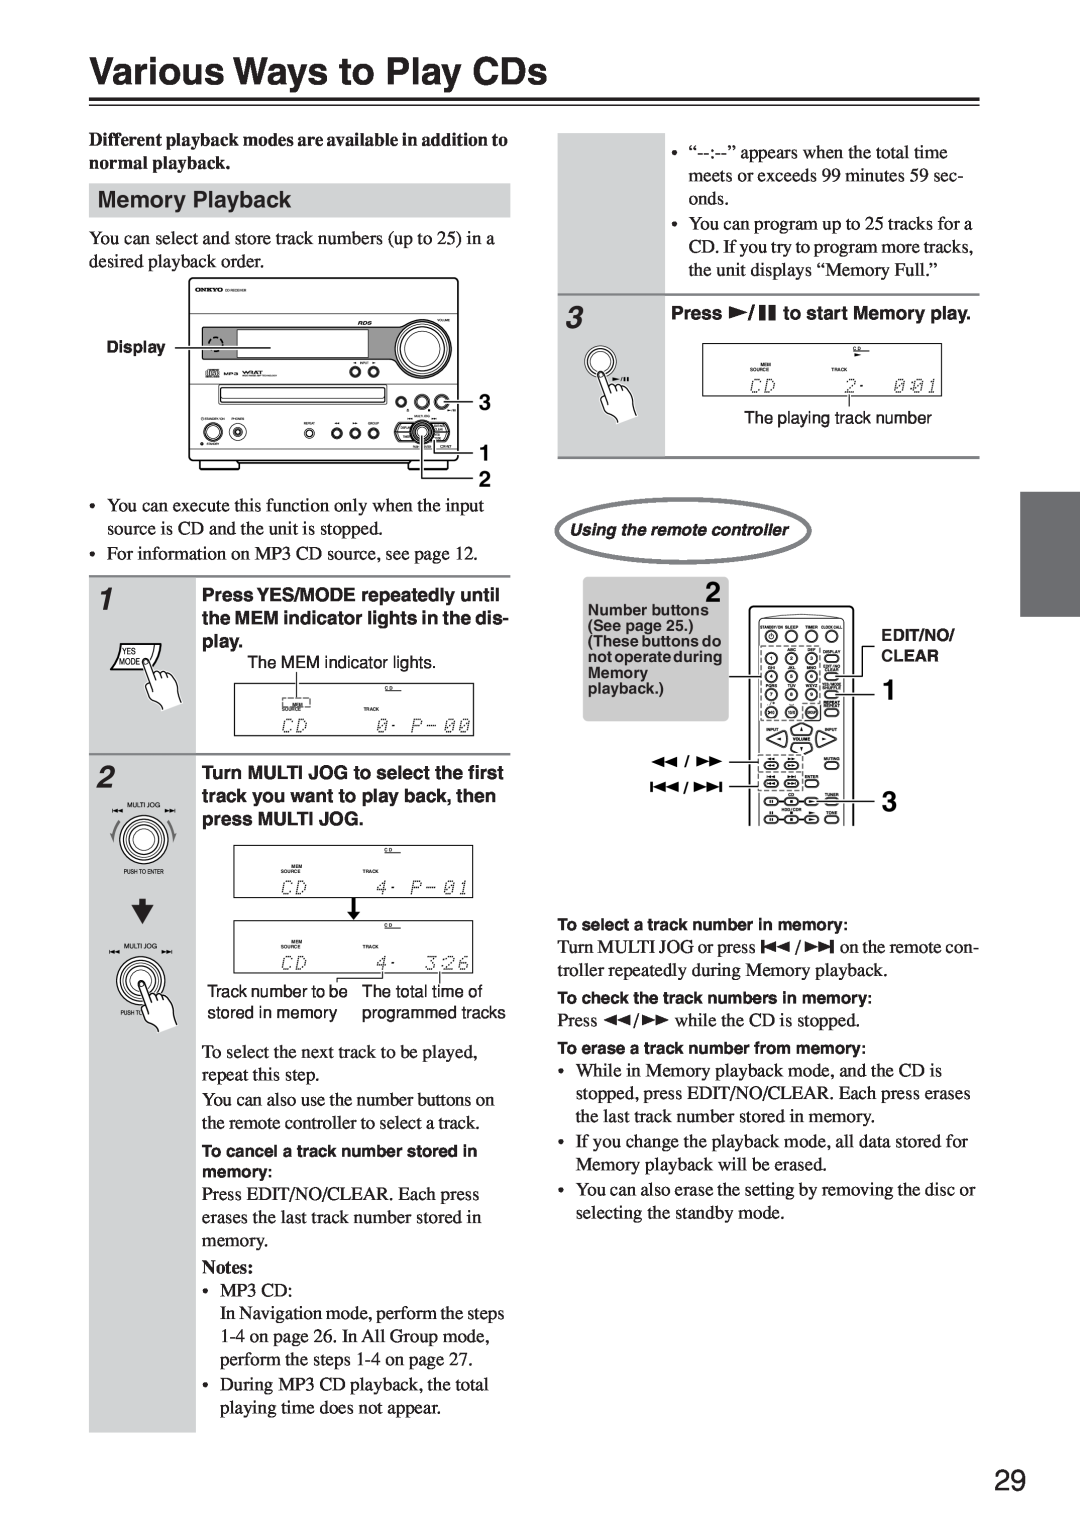 Onkyo CR-N7 instruction manual Various Ways to Play CDs, Memory Playback 